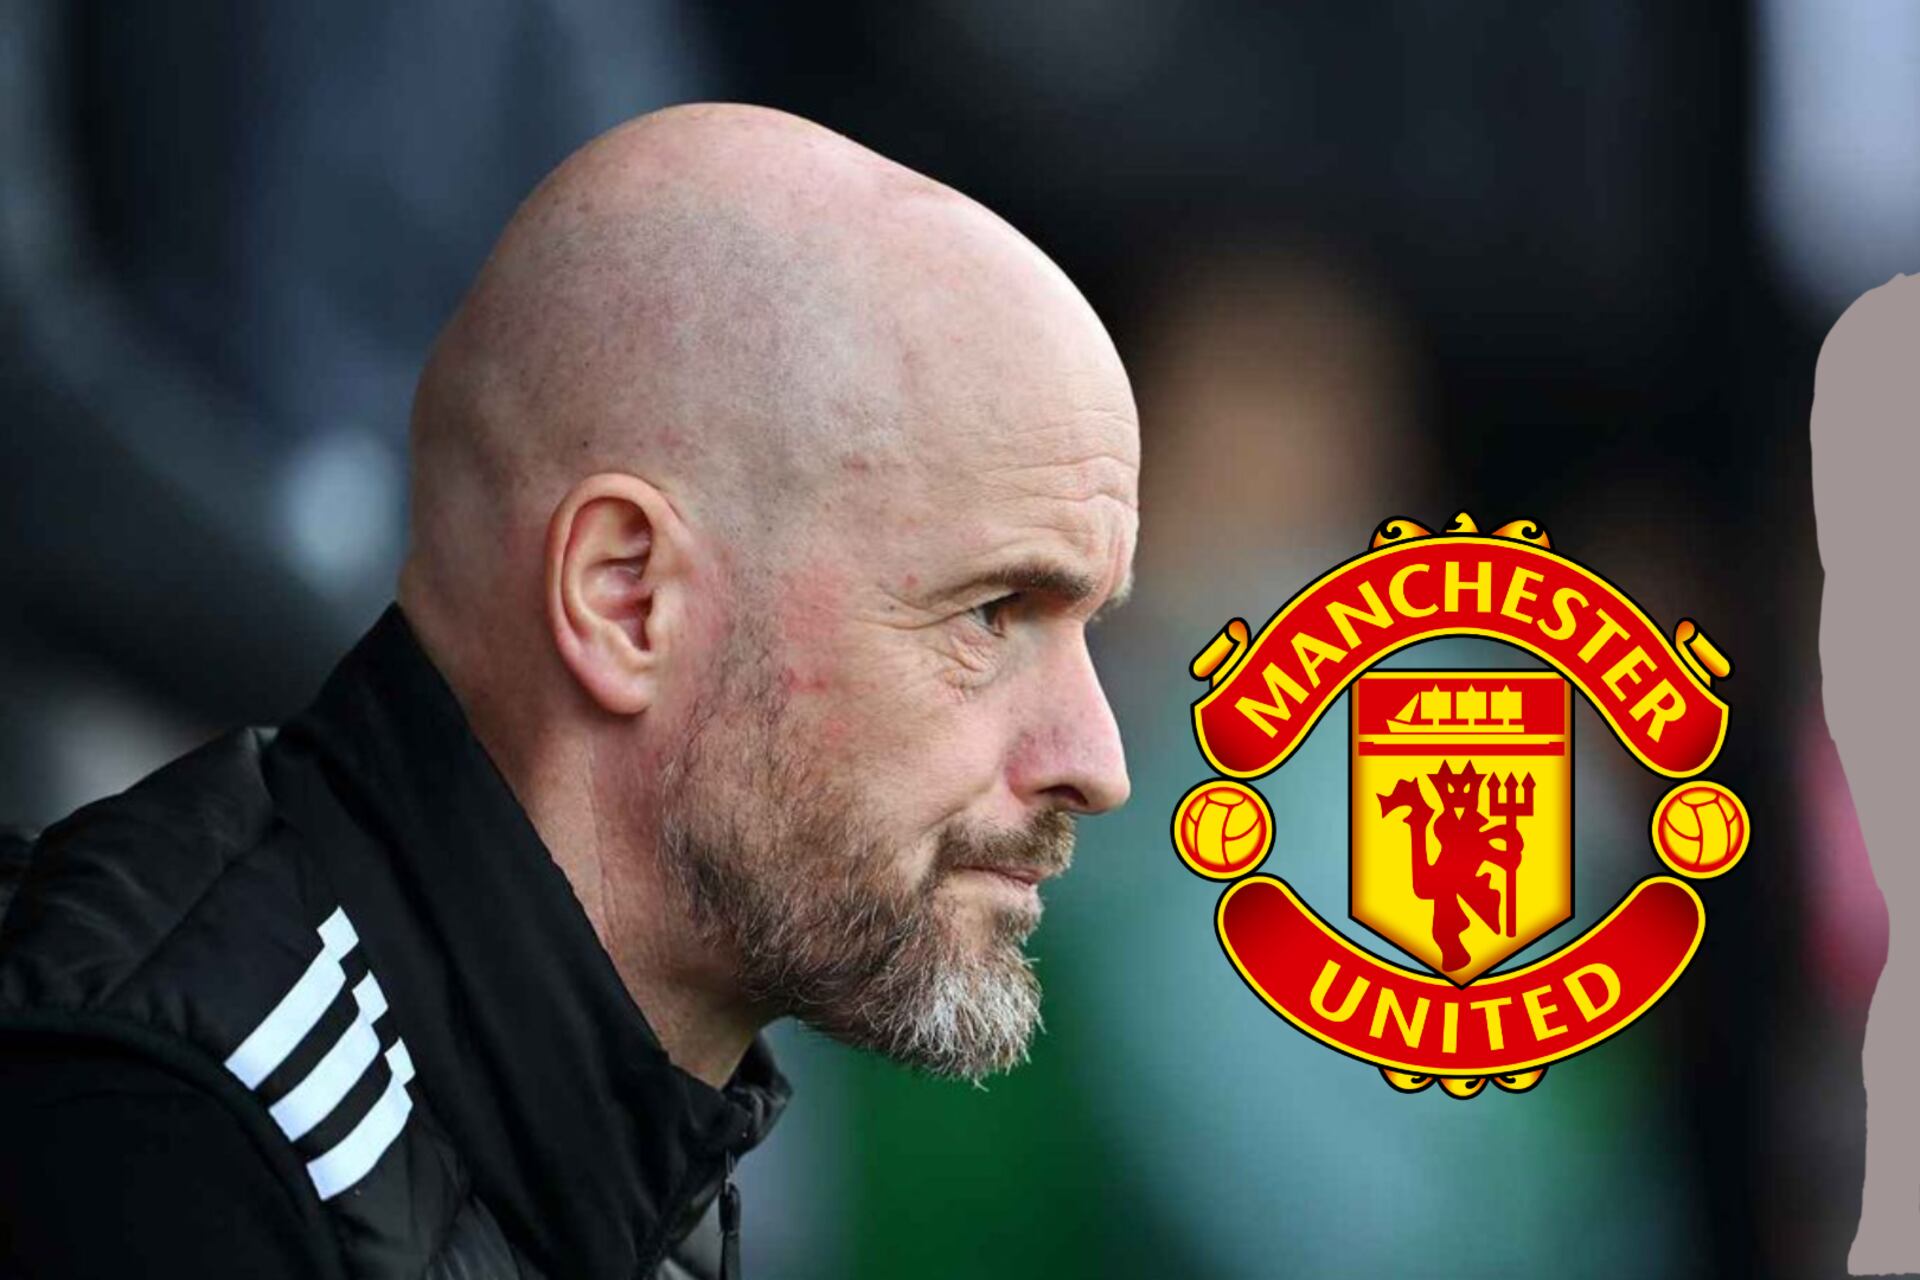 The player who is tired of Ten Hag at Manchester United and exposes him